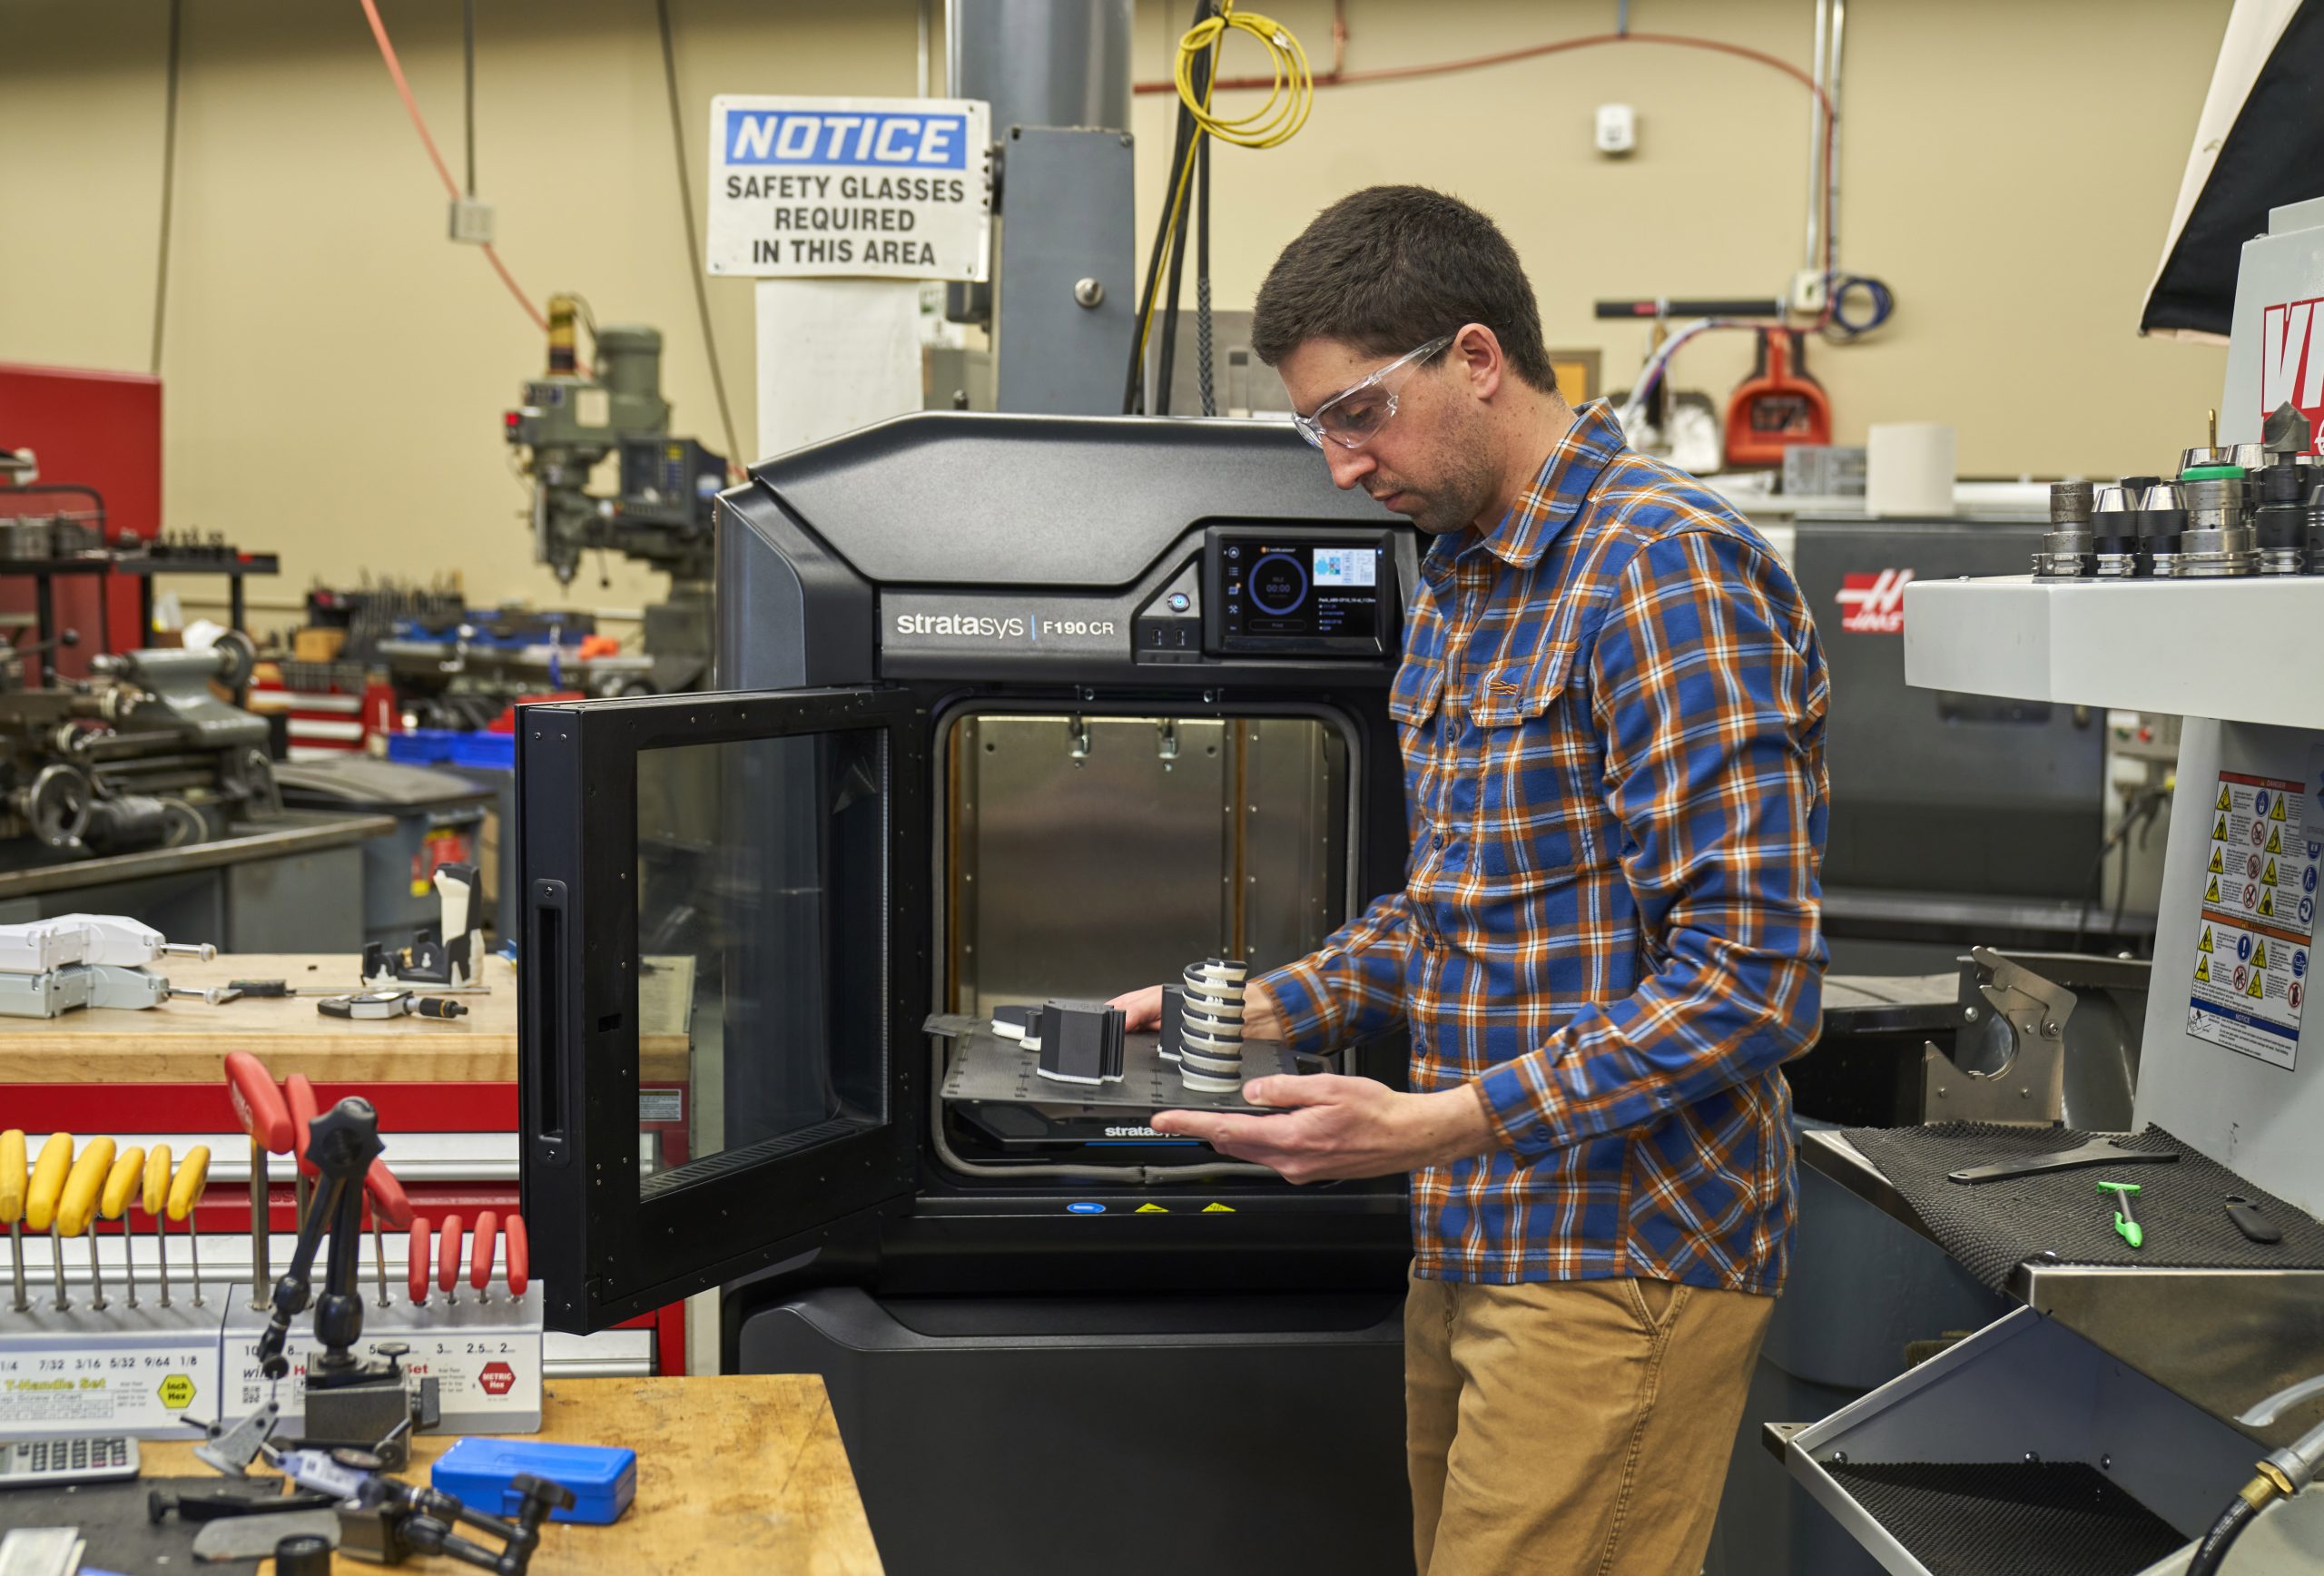 announces two new composite printers, 16 new materials, and software updates - Printing Industry